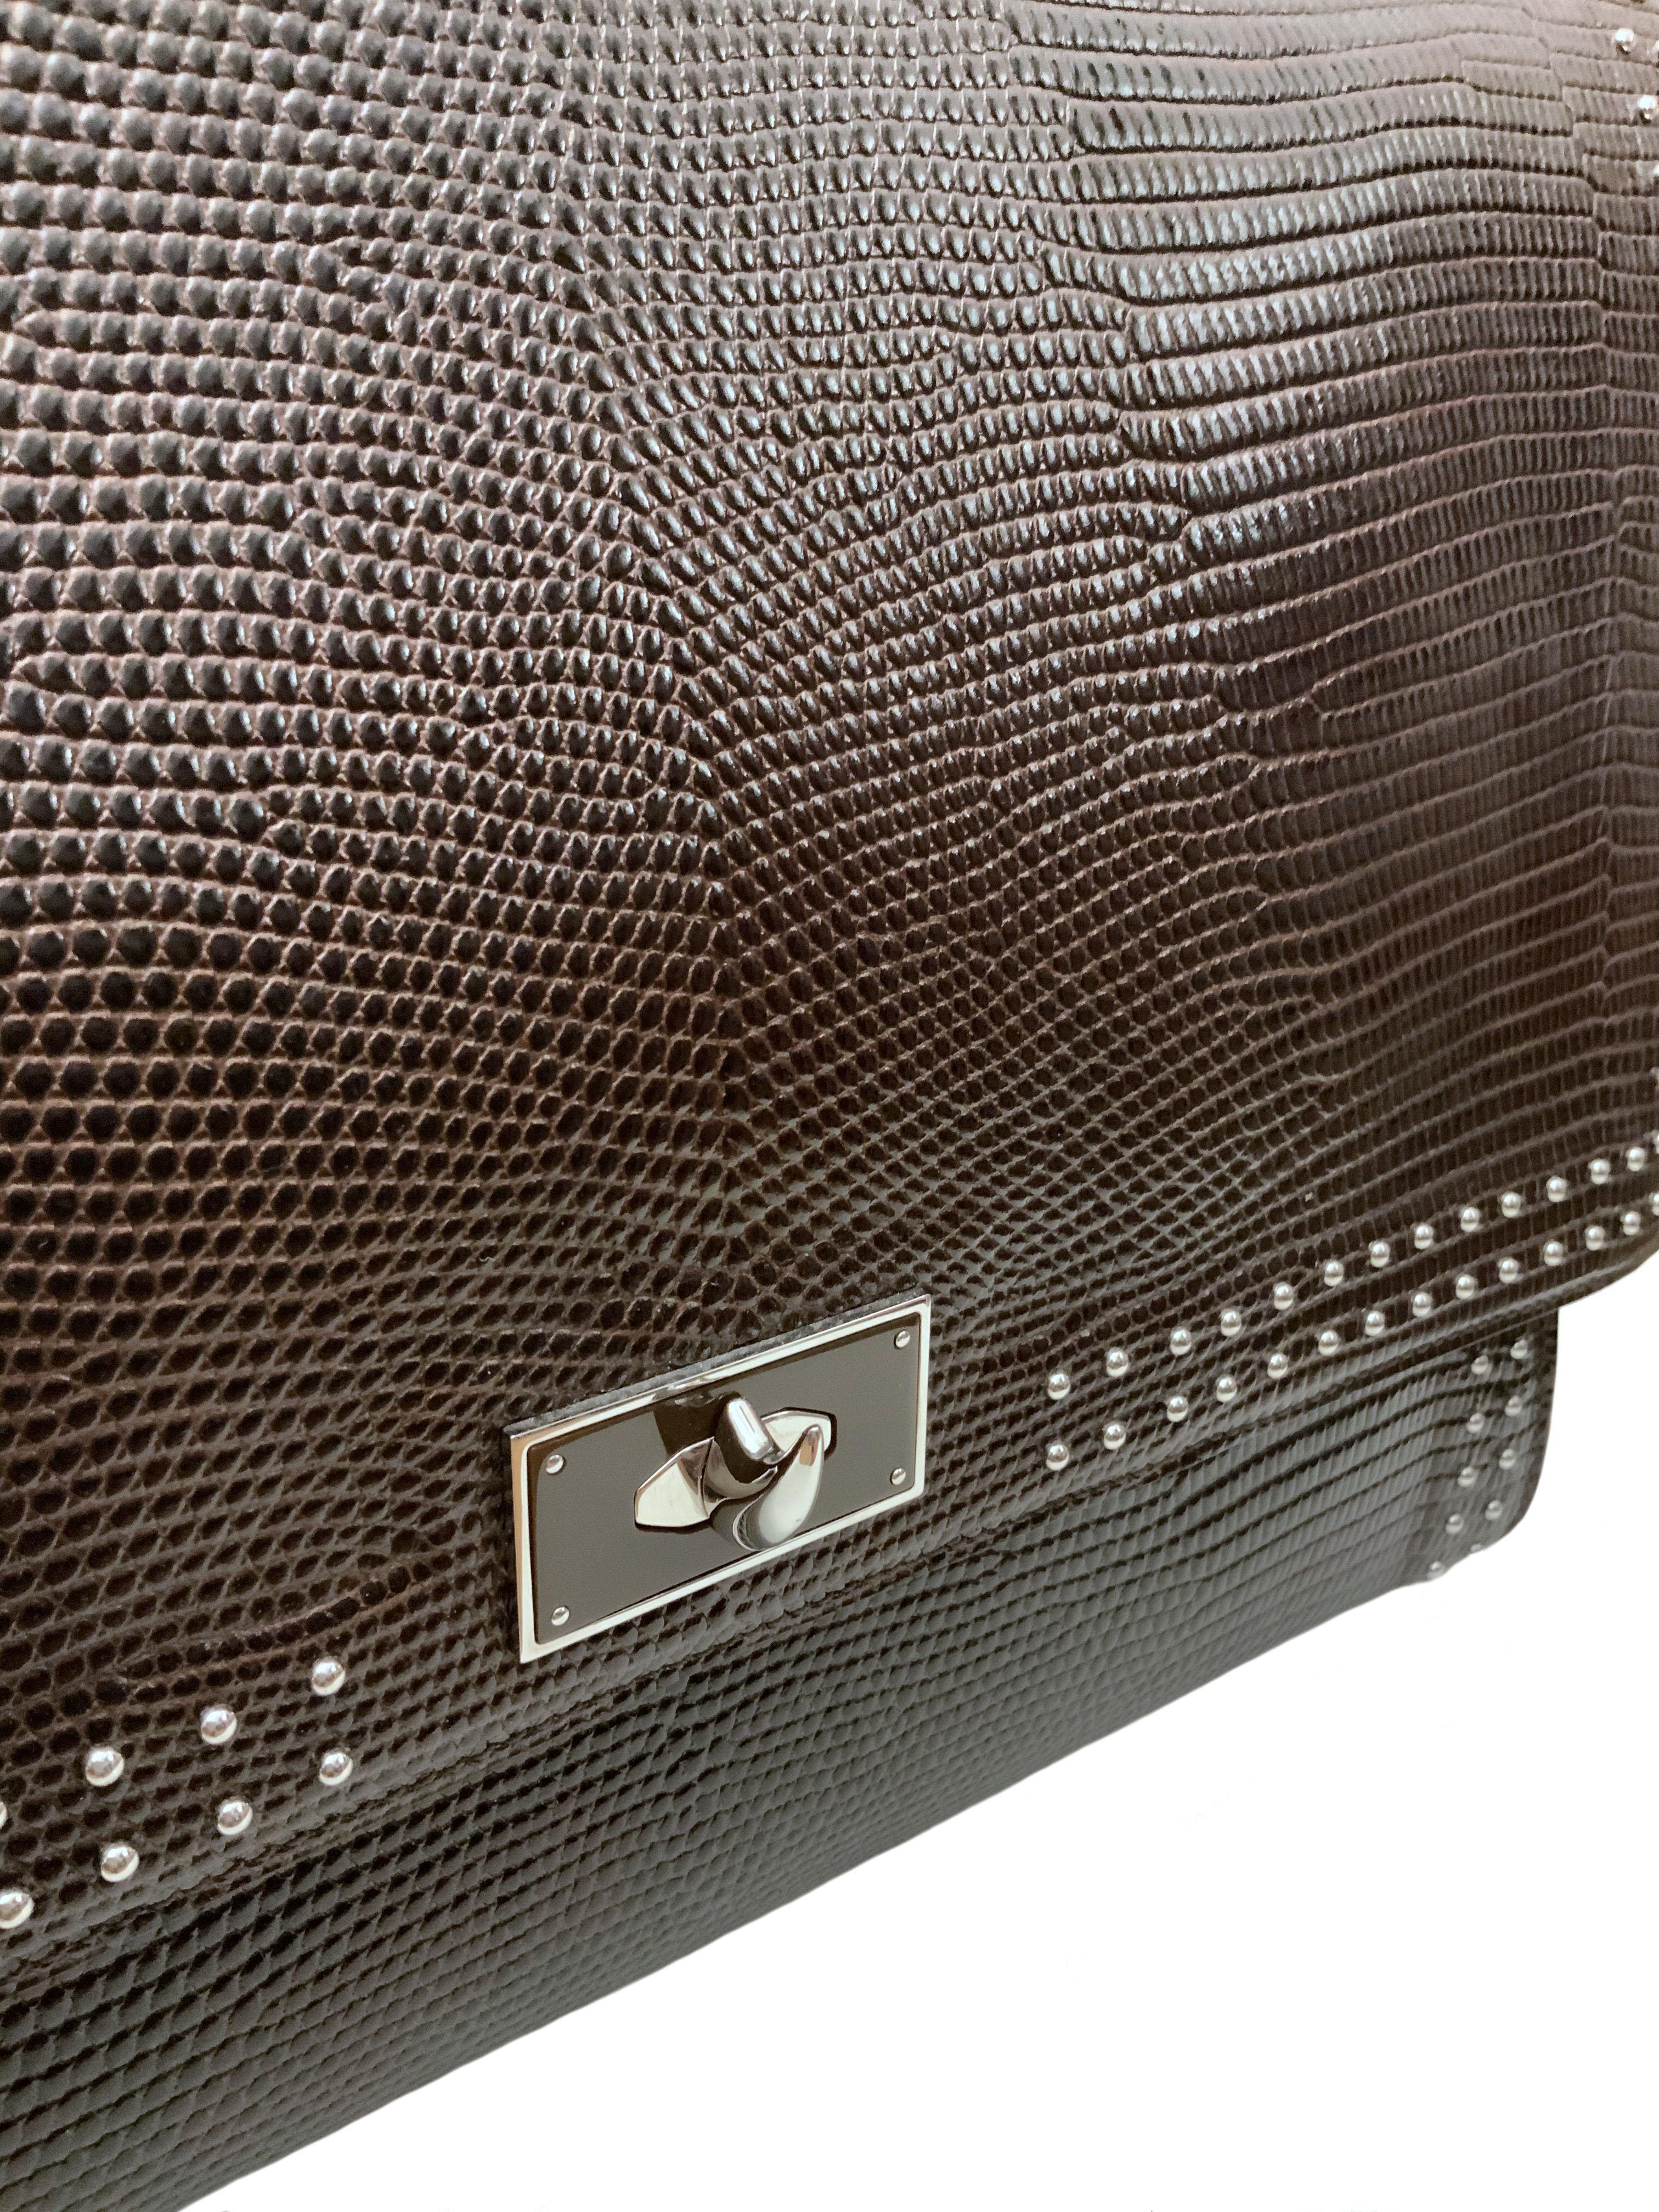 This pre-owned tote bag from Givenchy is crafted in embossed calfskin leather imitating lezard skin in a shiny brown rich color.
It features a front studded flap with square corners, the brand's iconic shark-tooth inspired clasp.

Collection: Fall